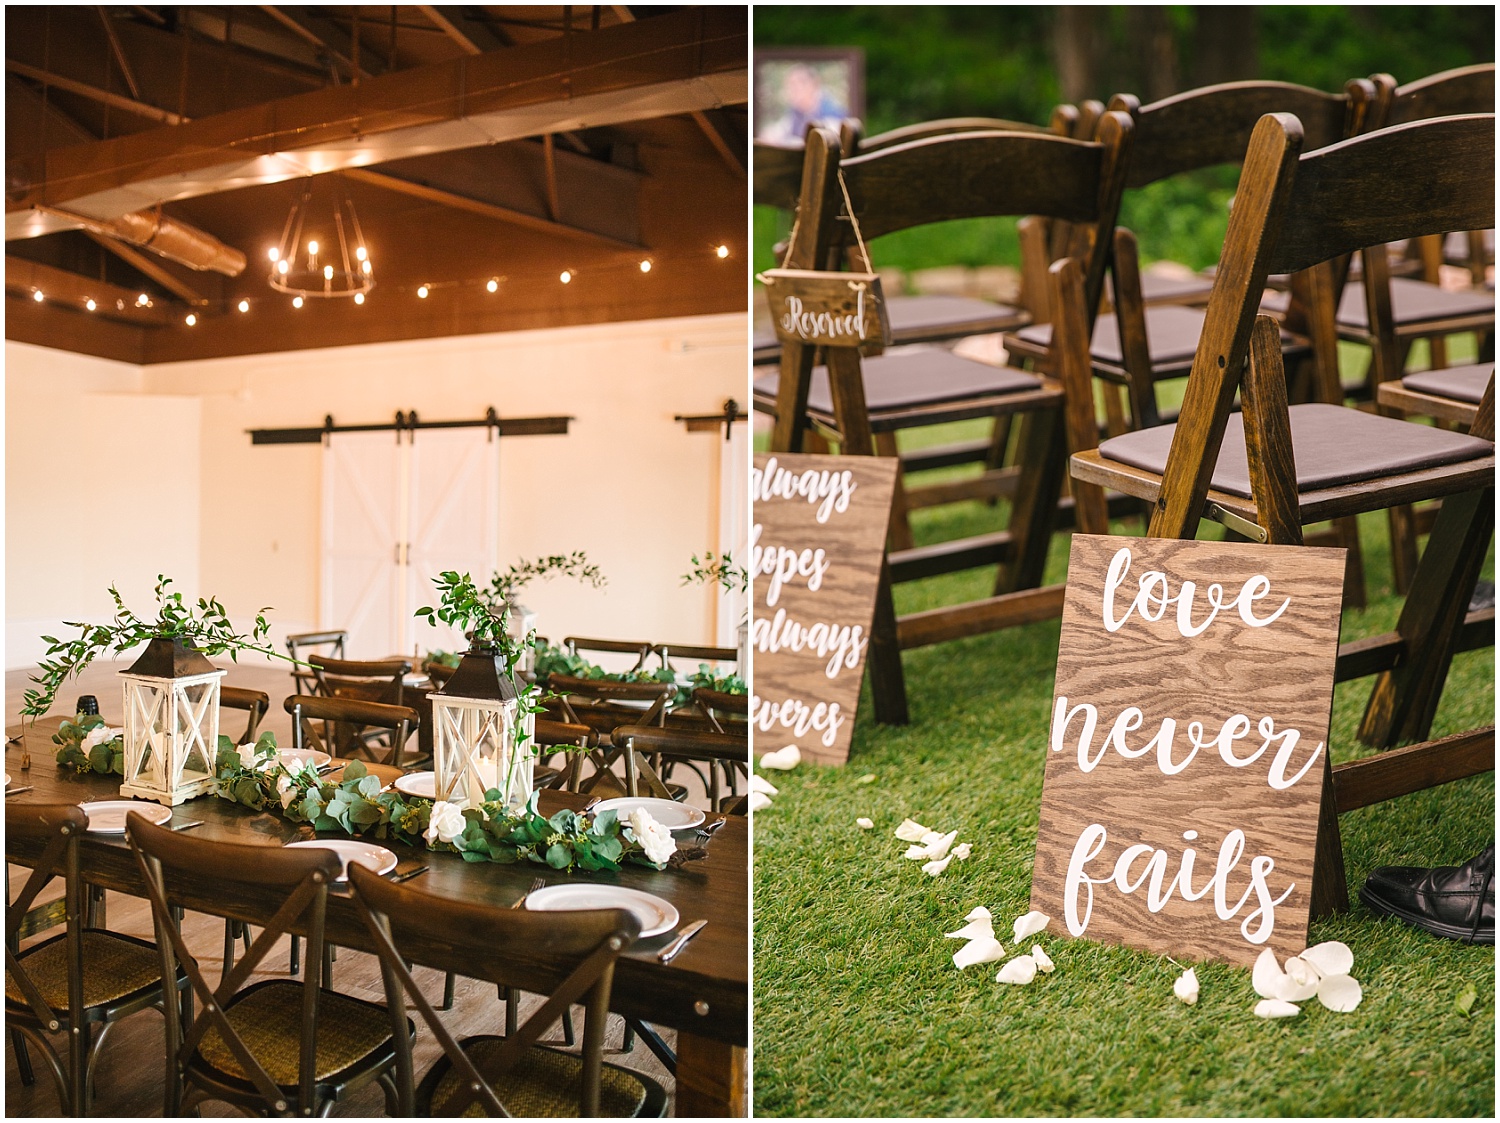 Rustic wedding details, green table runners, and lanterns decorate Creekside Event Center wedding